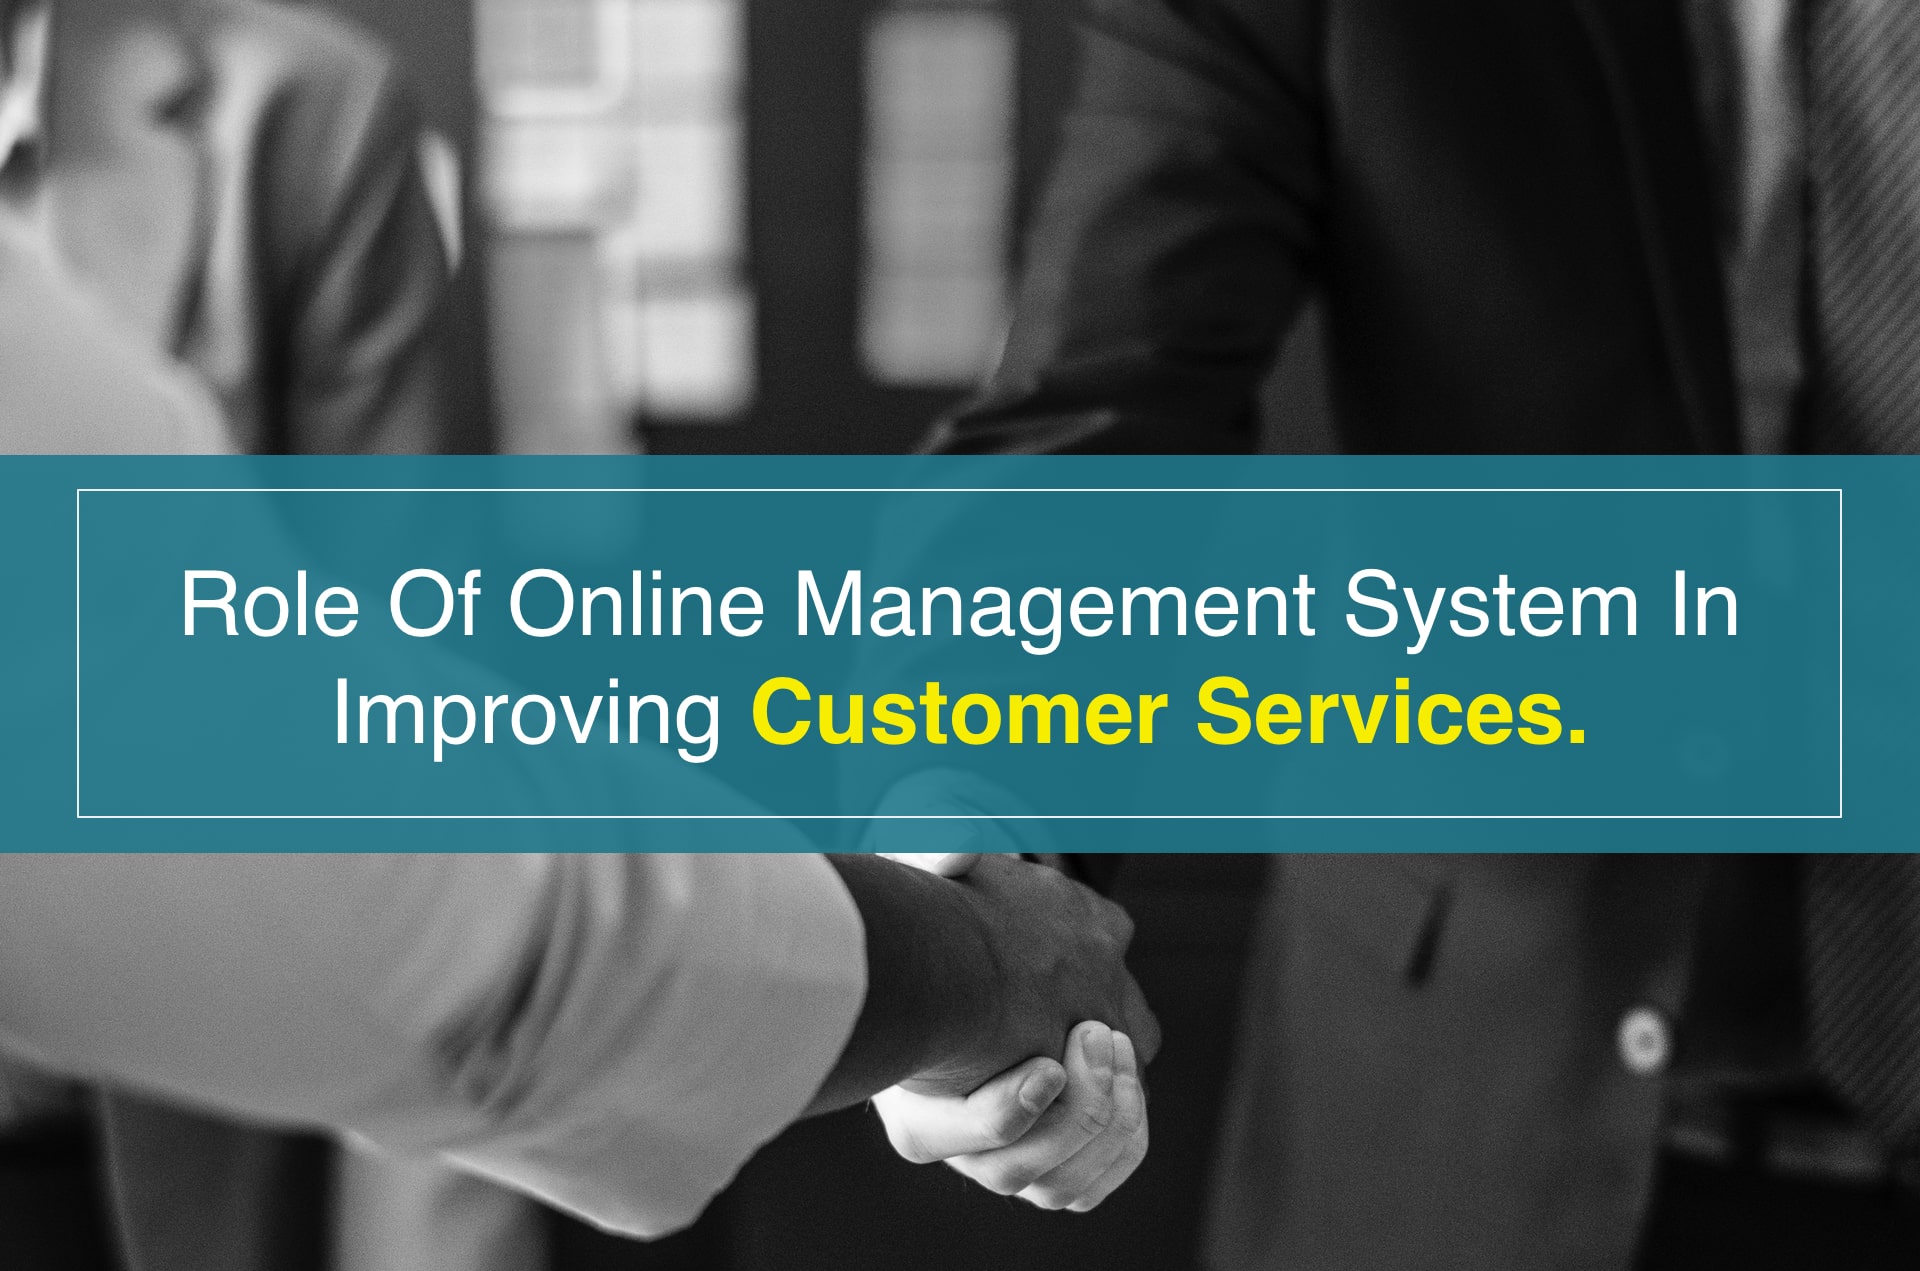 Role of online management system in improving customer services